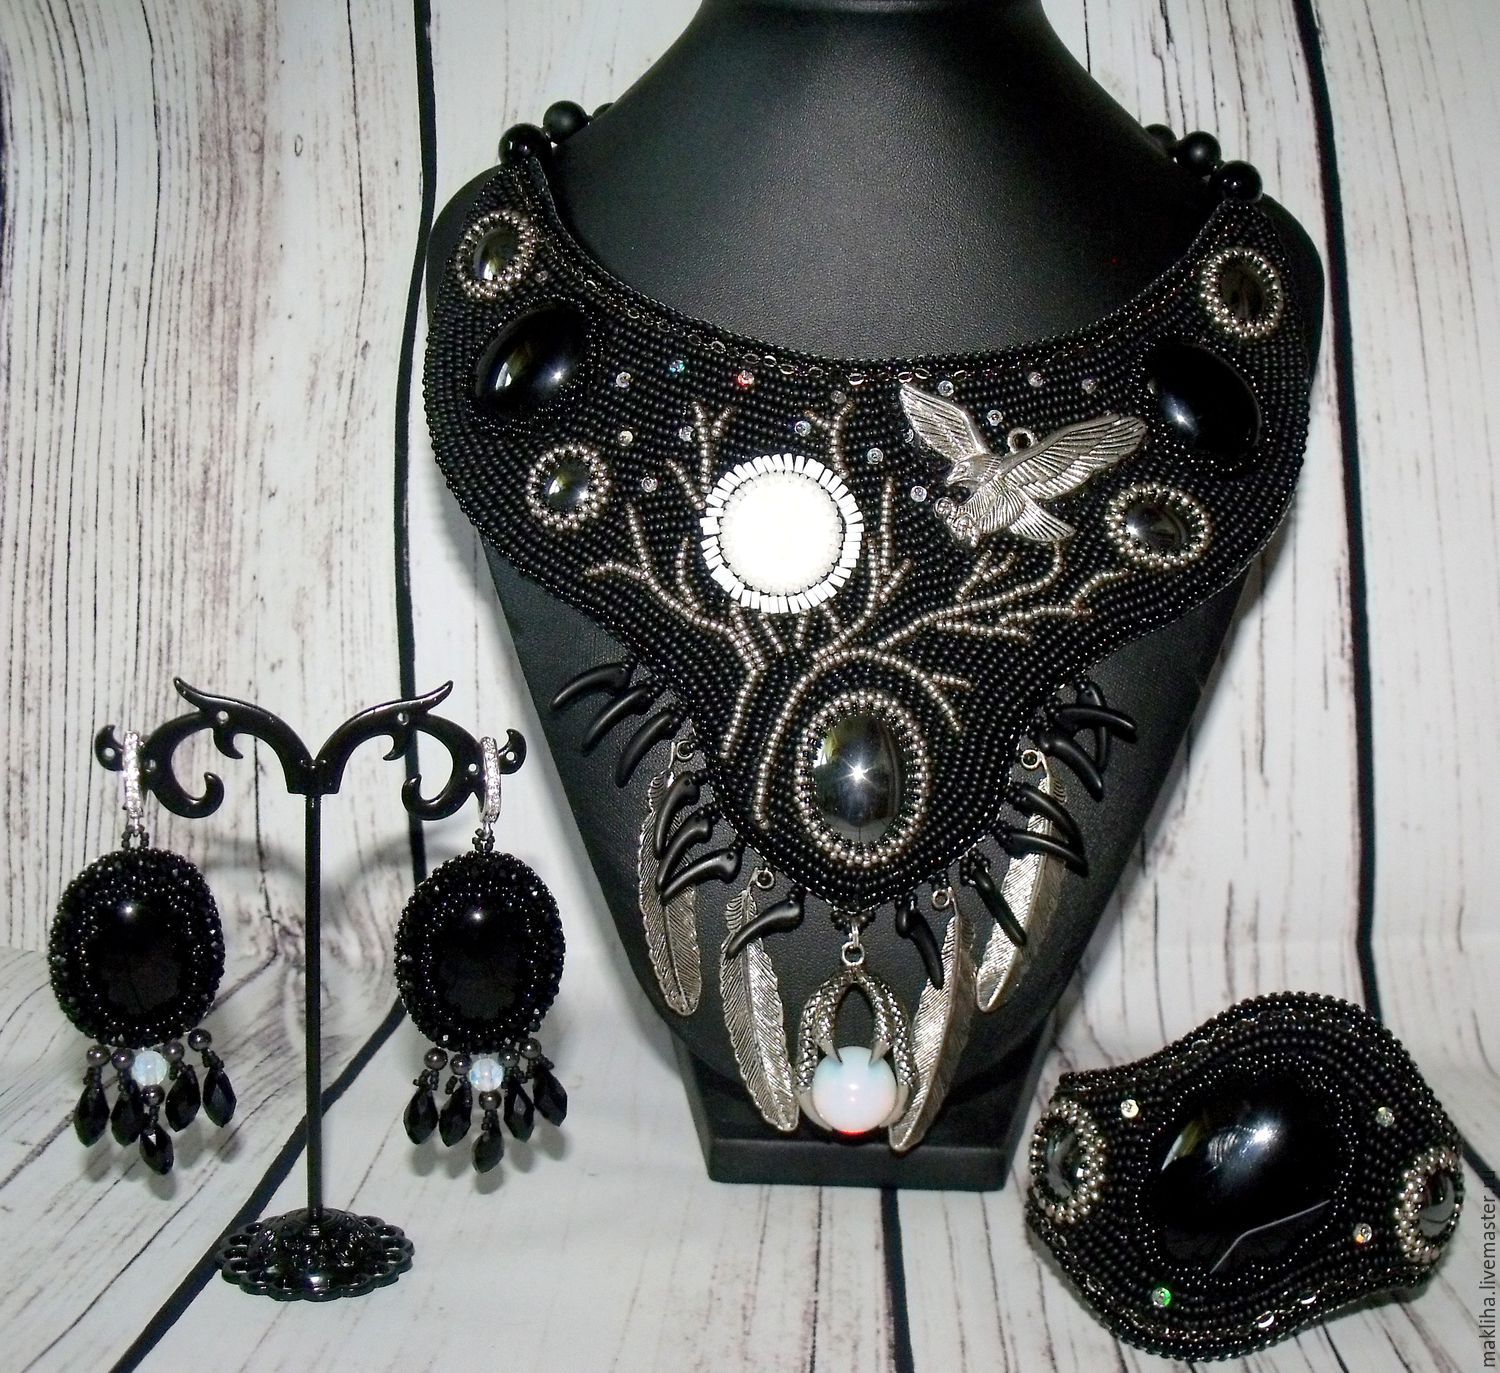 Jewelry set Necklace Earrings Bracelet black 'At night', Jewelry Sets, Moscow,  Фото №1